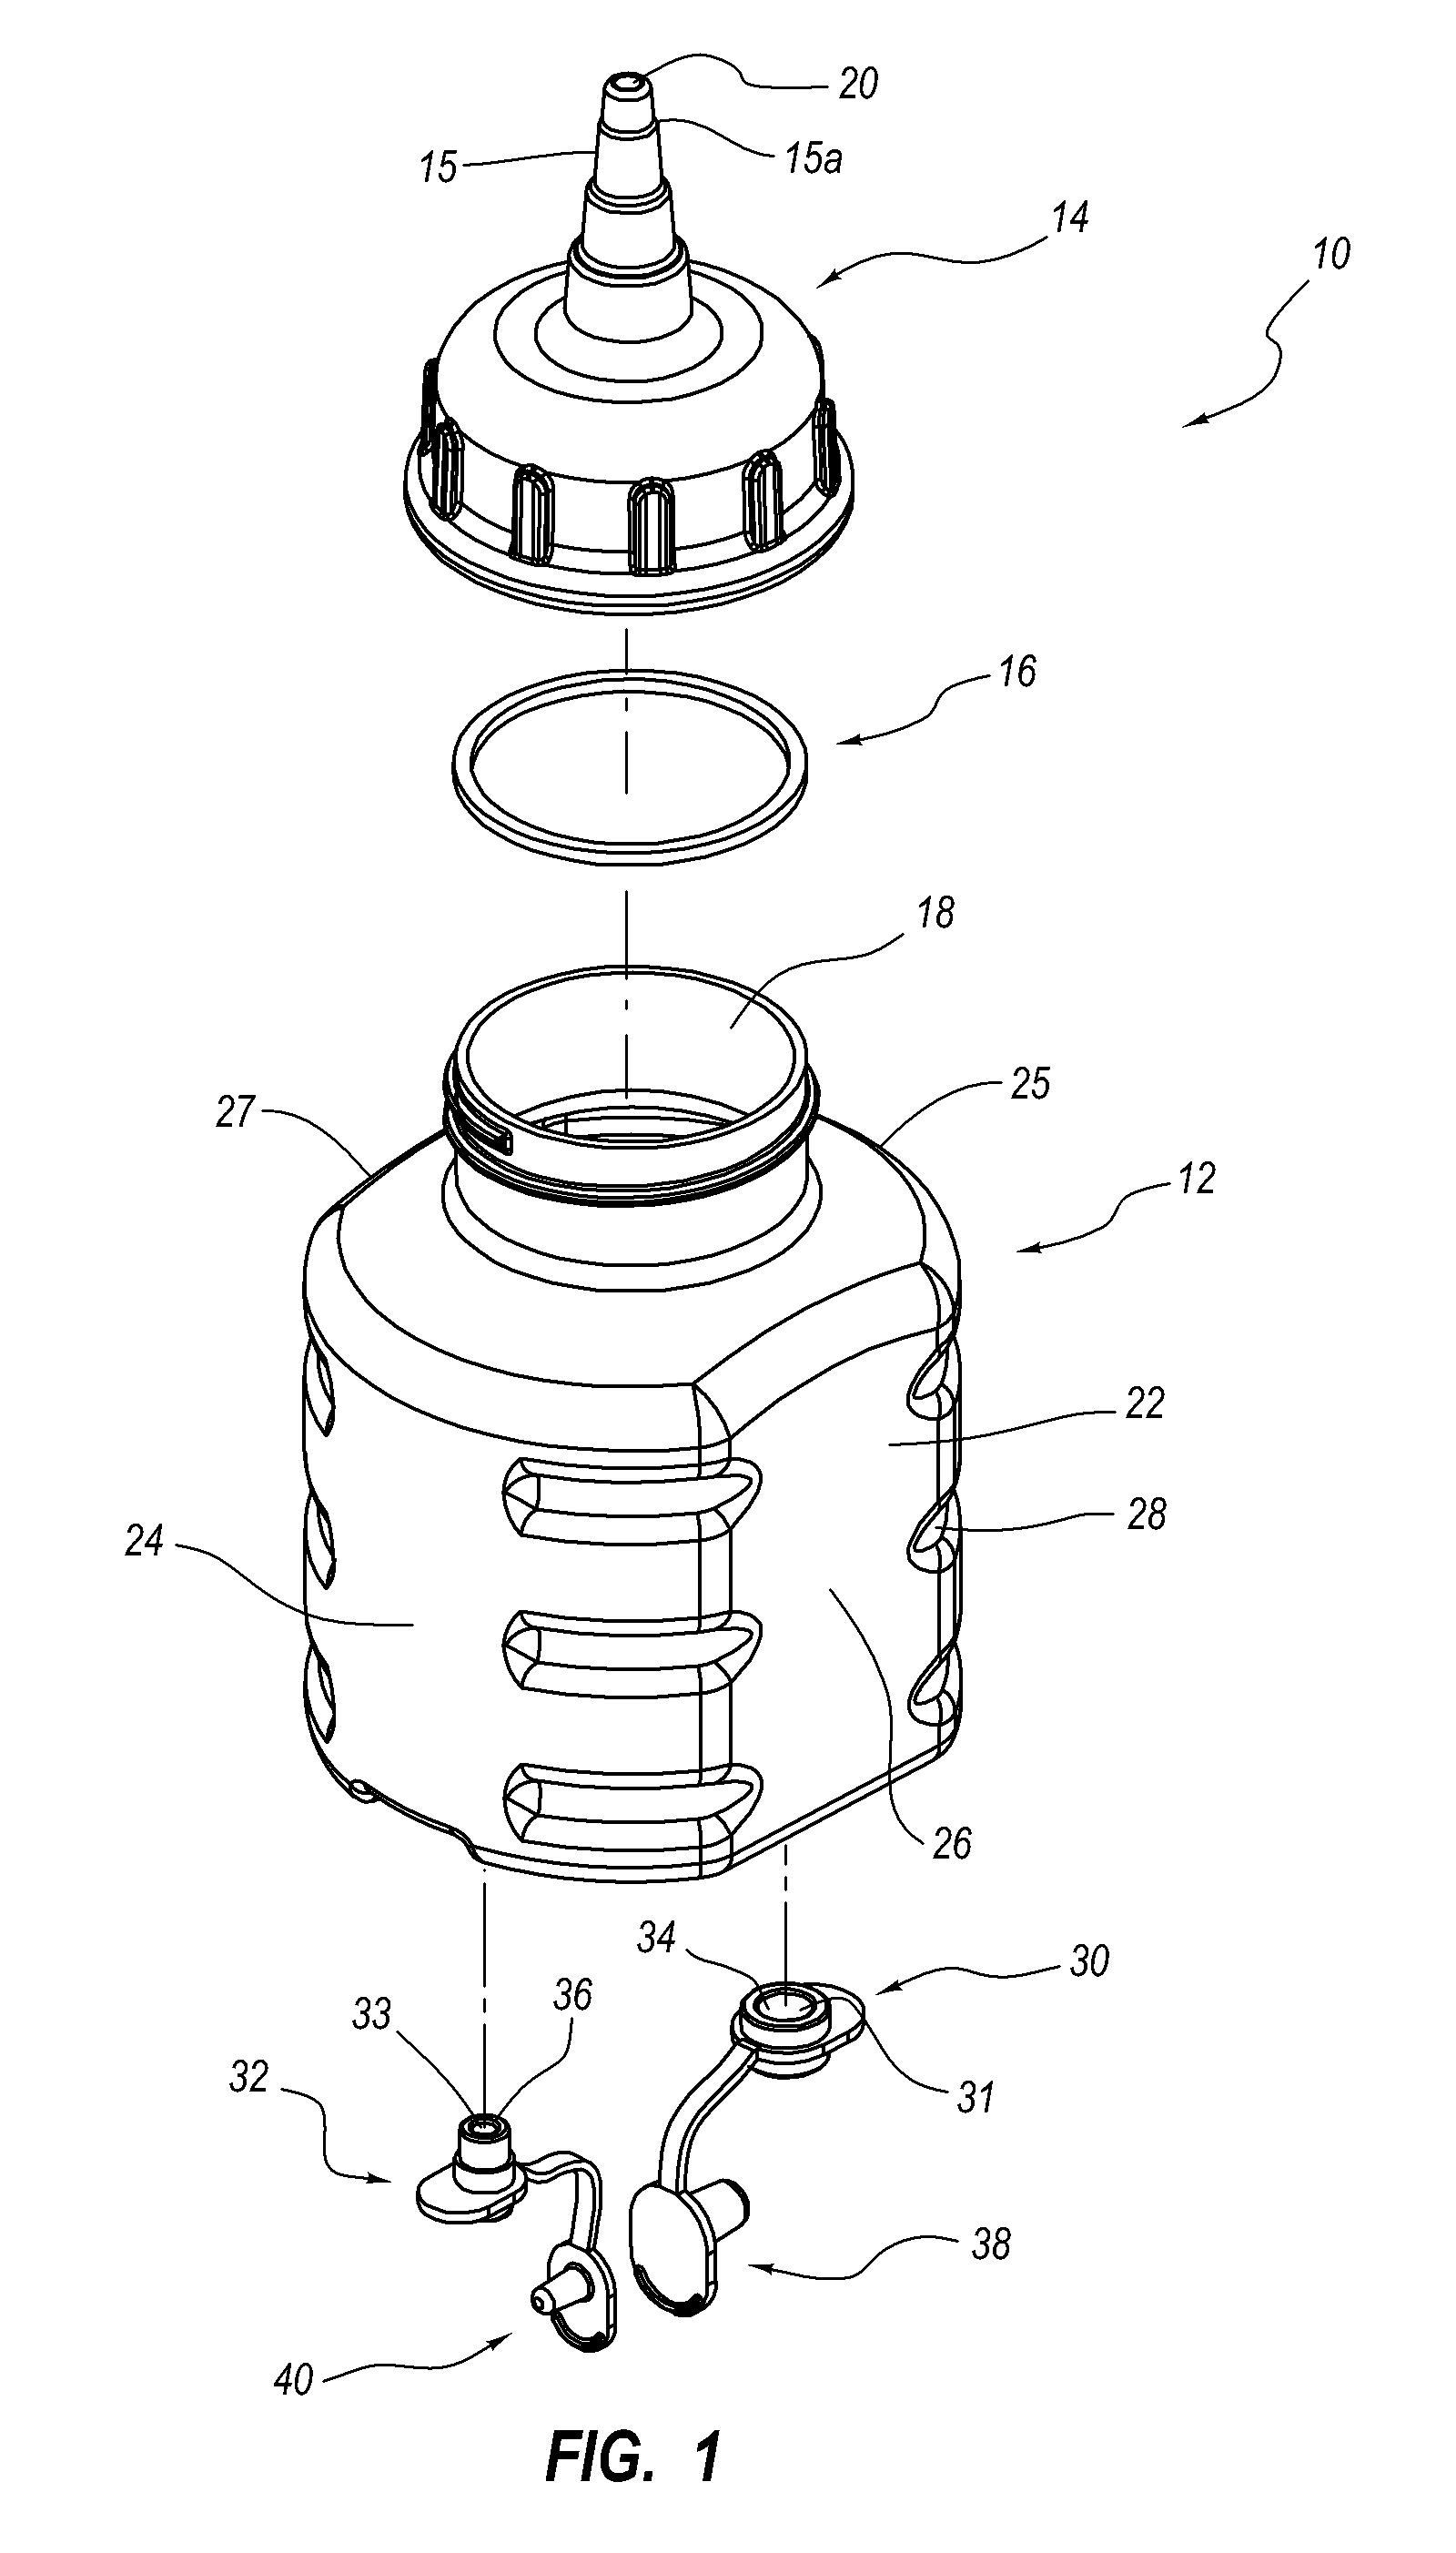 Bottle for delivering nutrients to an enteral feeding tube